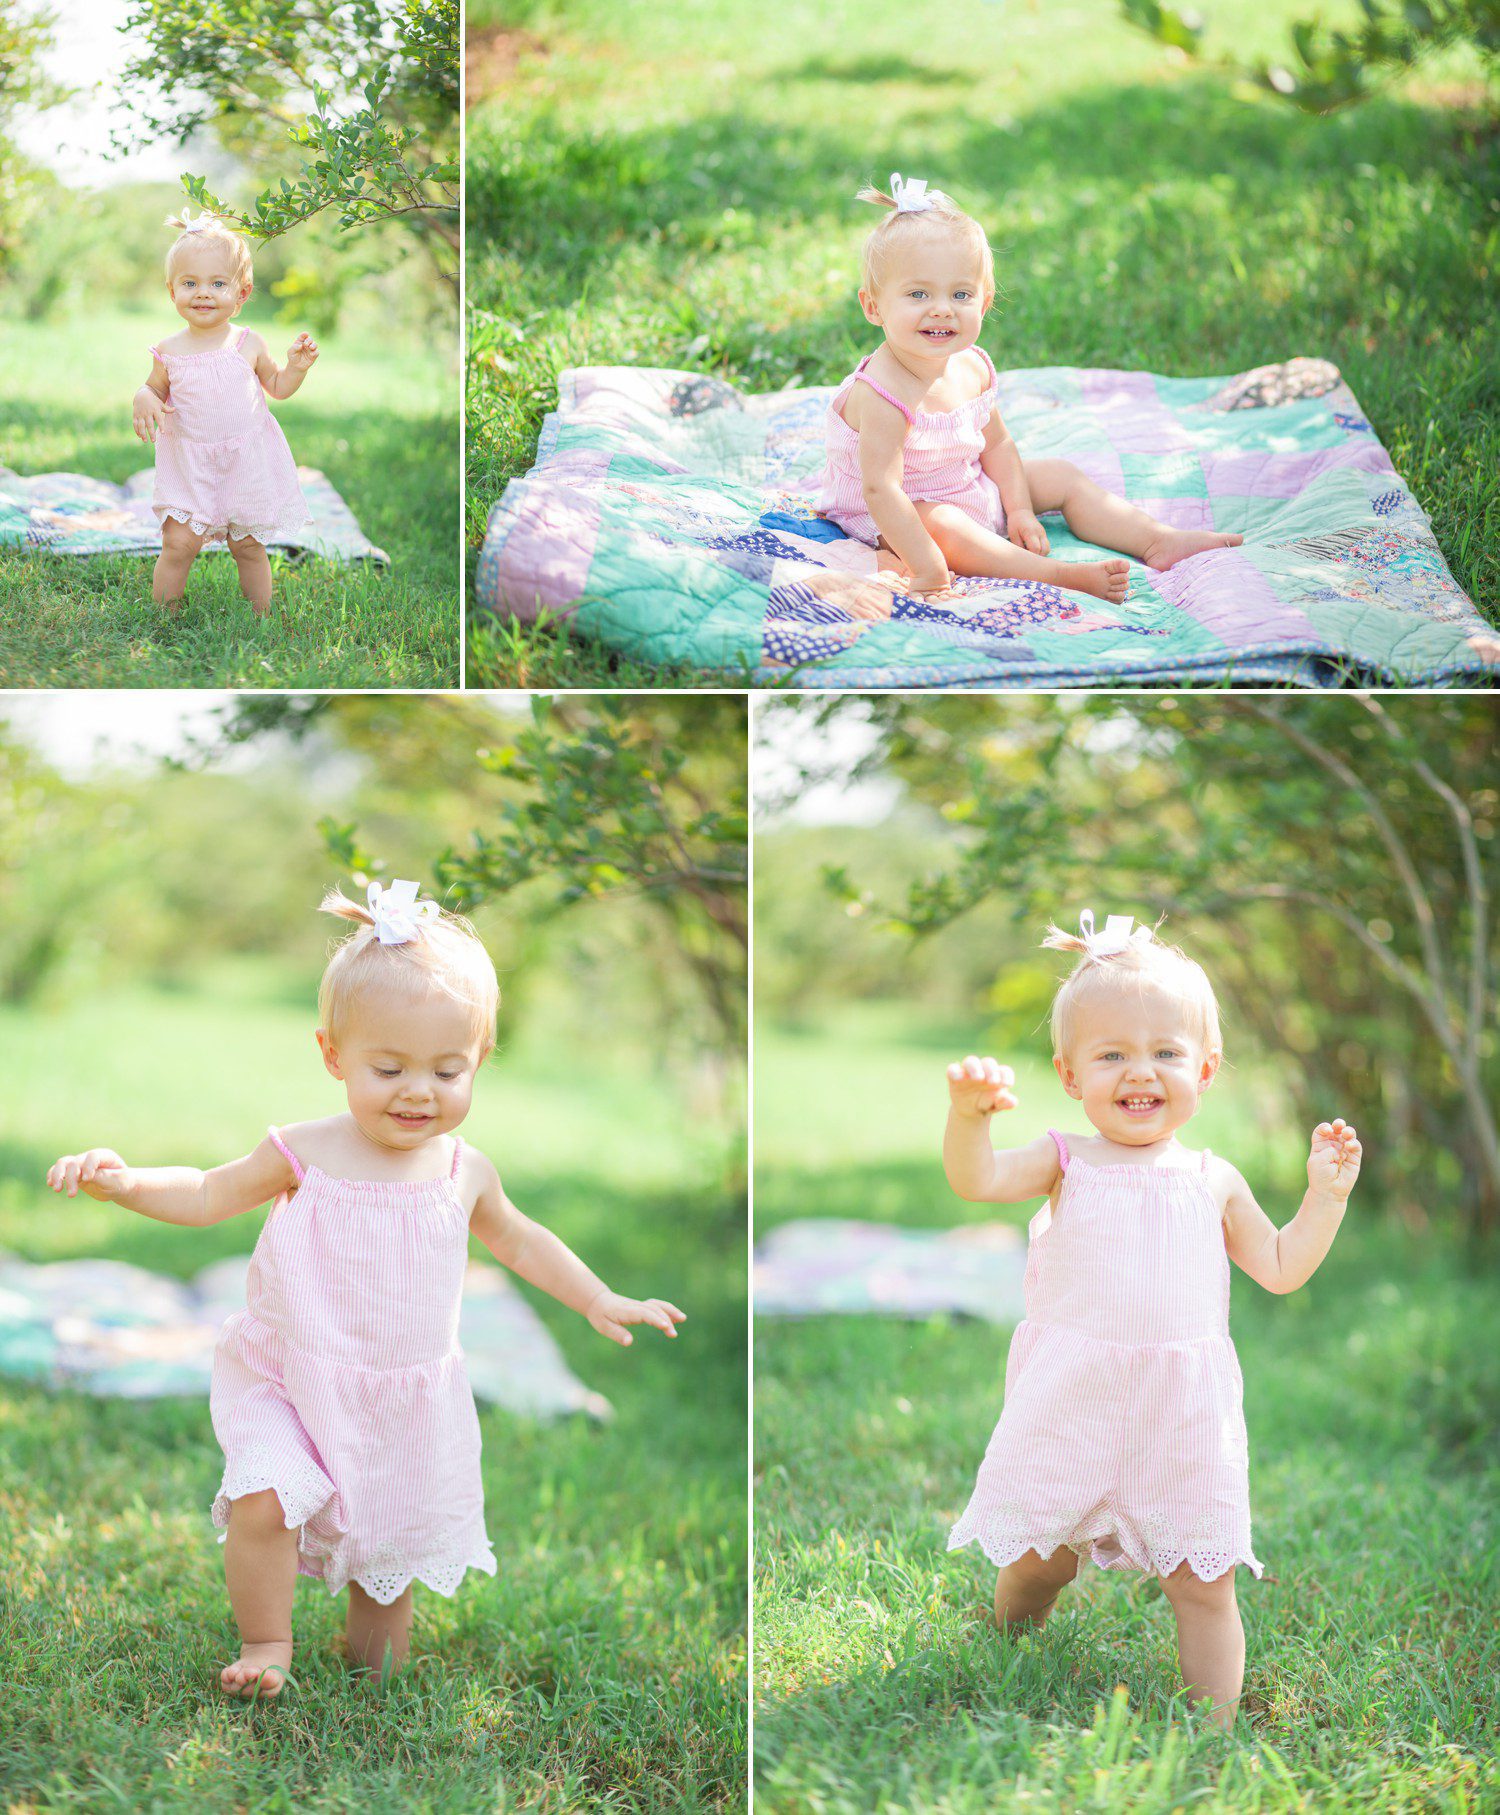 Baby Avery 1st birthday Blueberry patch family photo shoot at Golden Bell Farm in Franklin, TN photography by Krista Lee Nashville TN